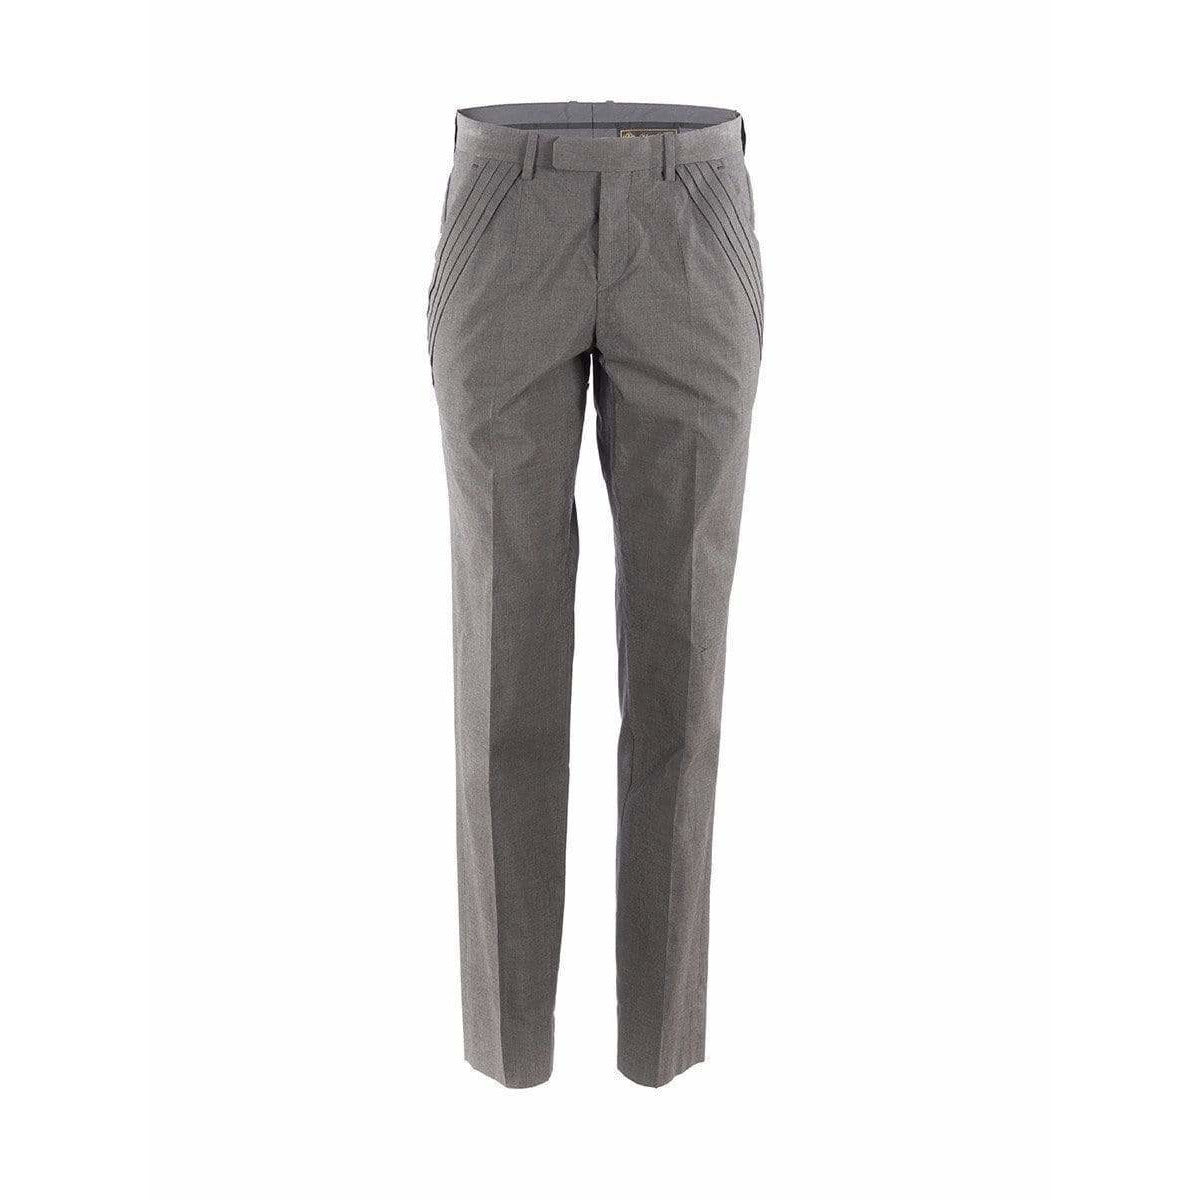 pleated-trouser-in-grey Womens Pants Dim Gray